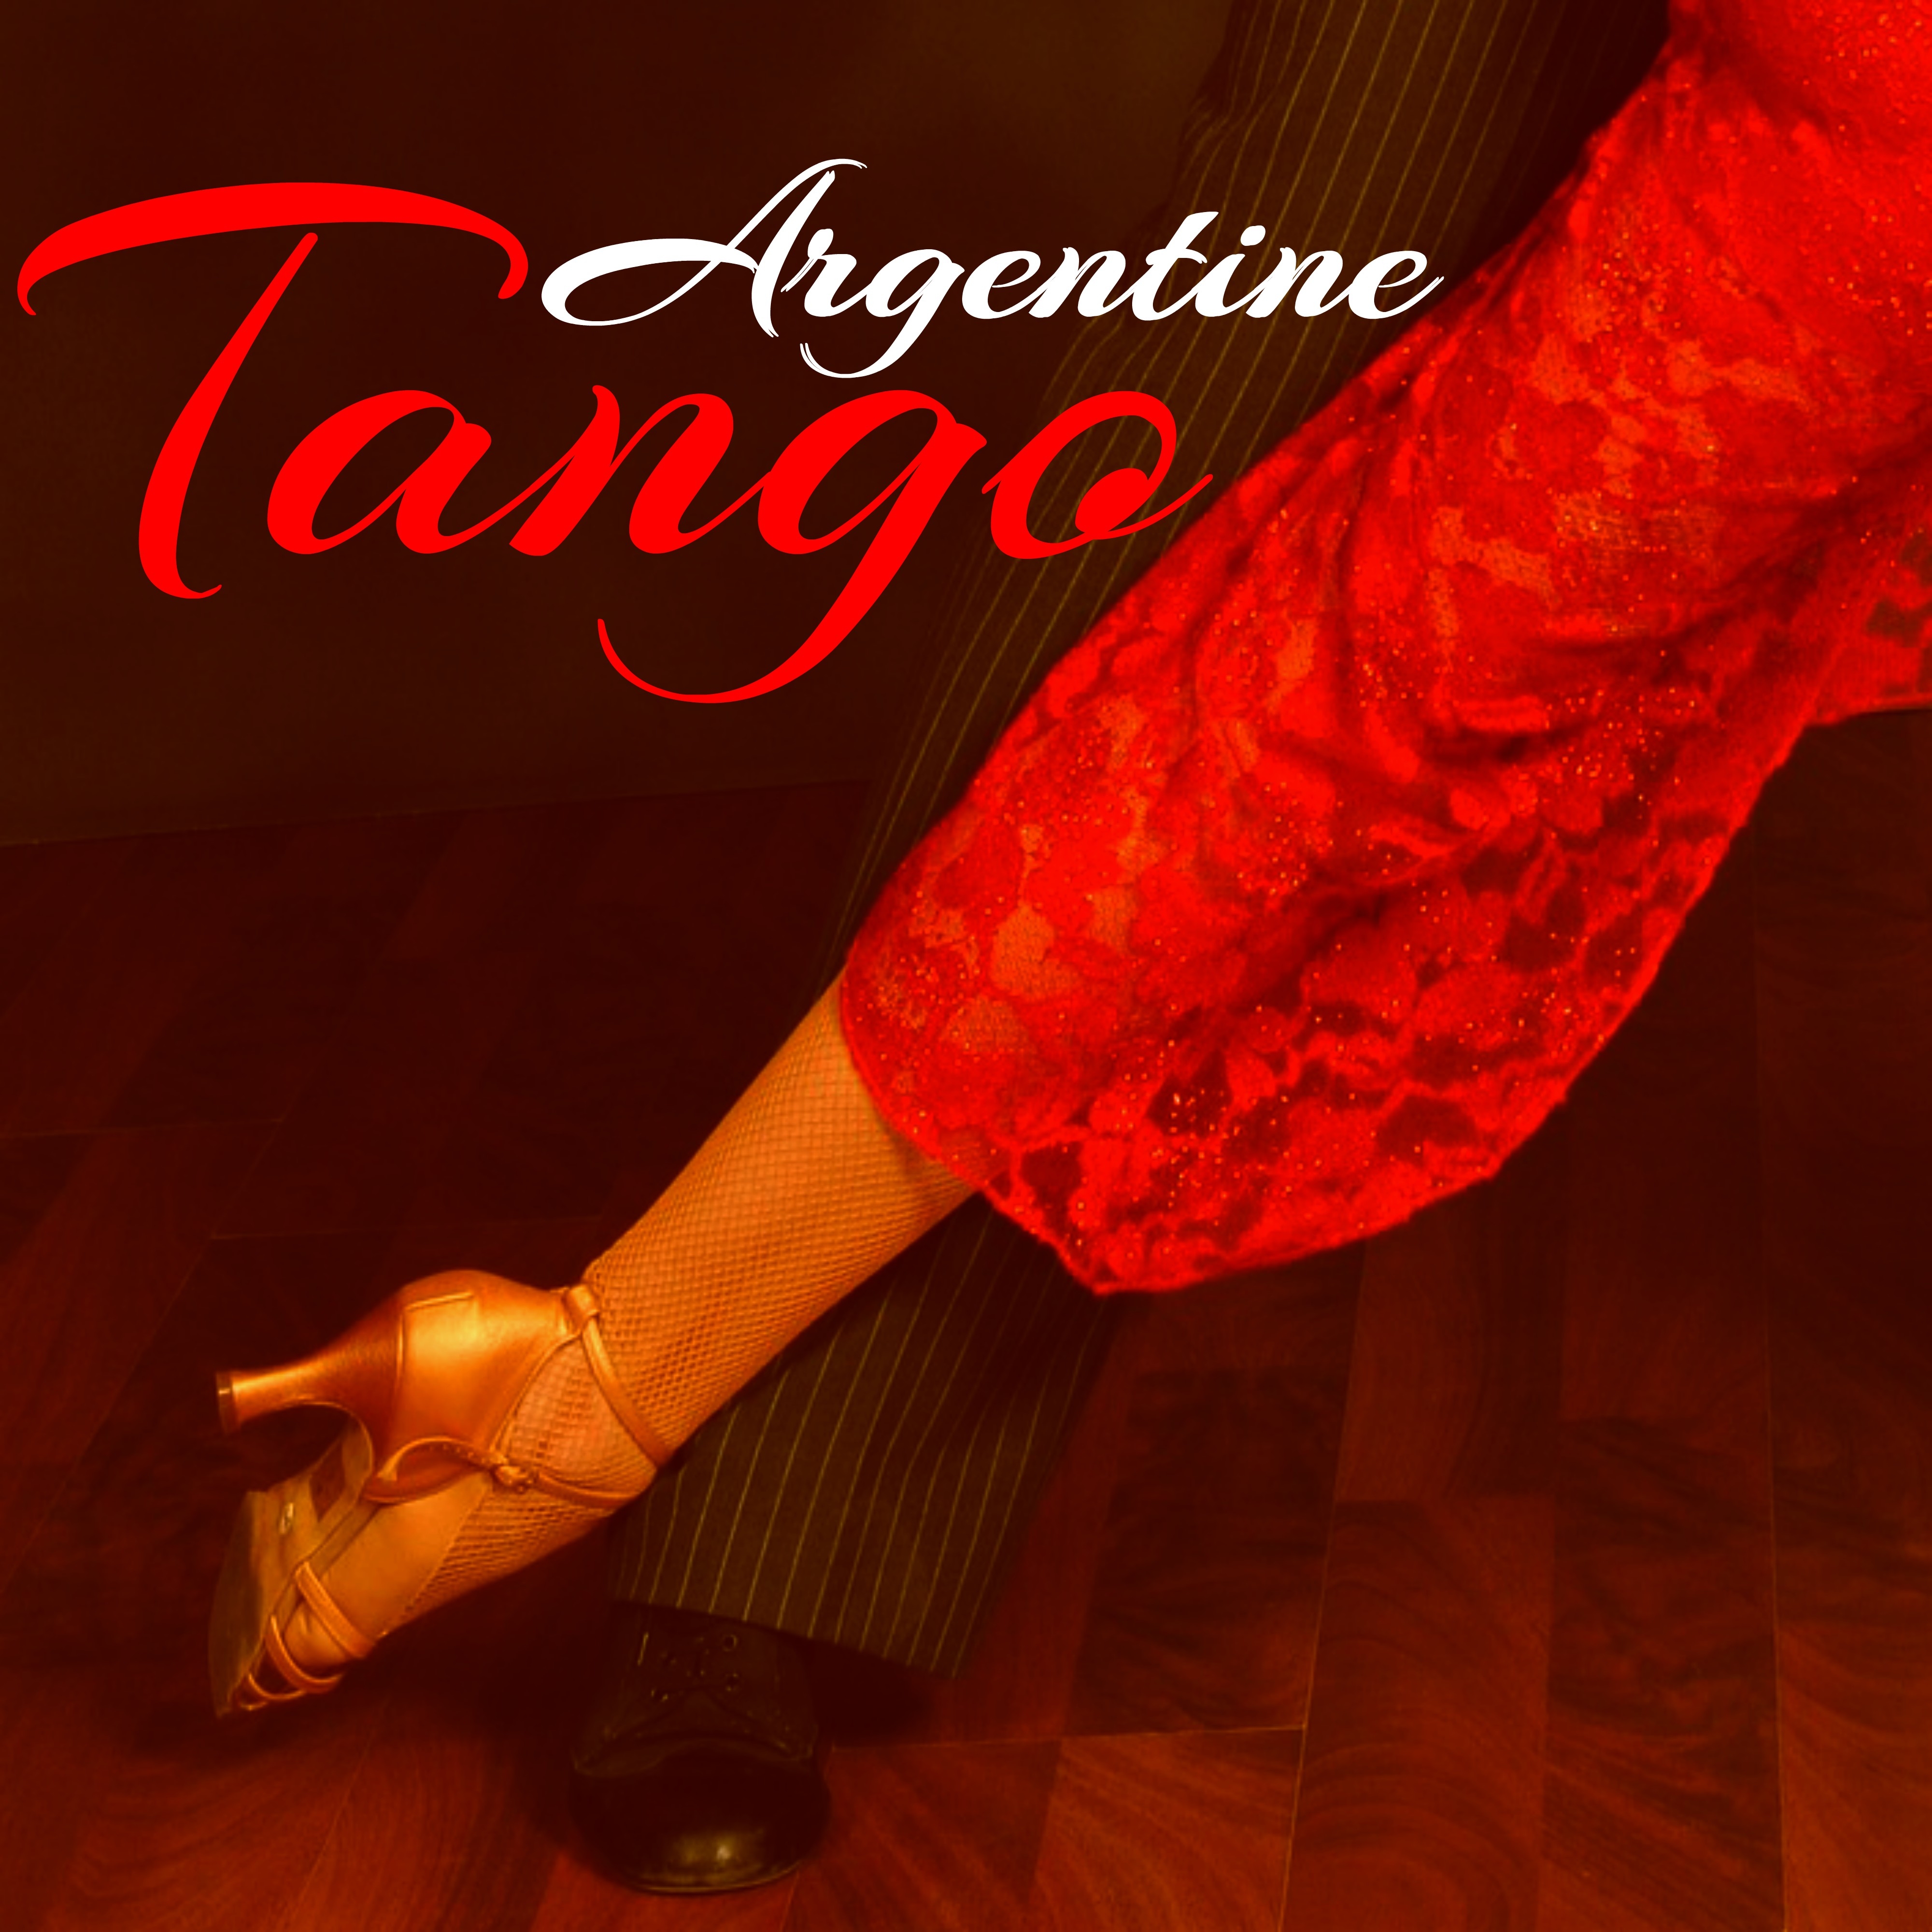 Argentine Tango - Music full of Fierce and Passion for Smooth, **** and Strong Tango